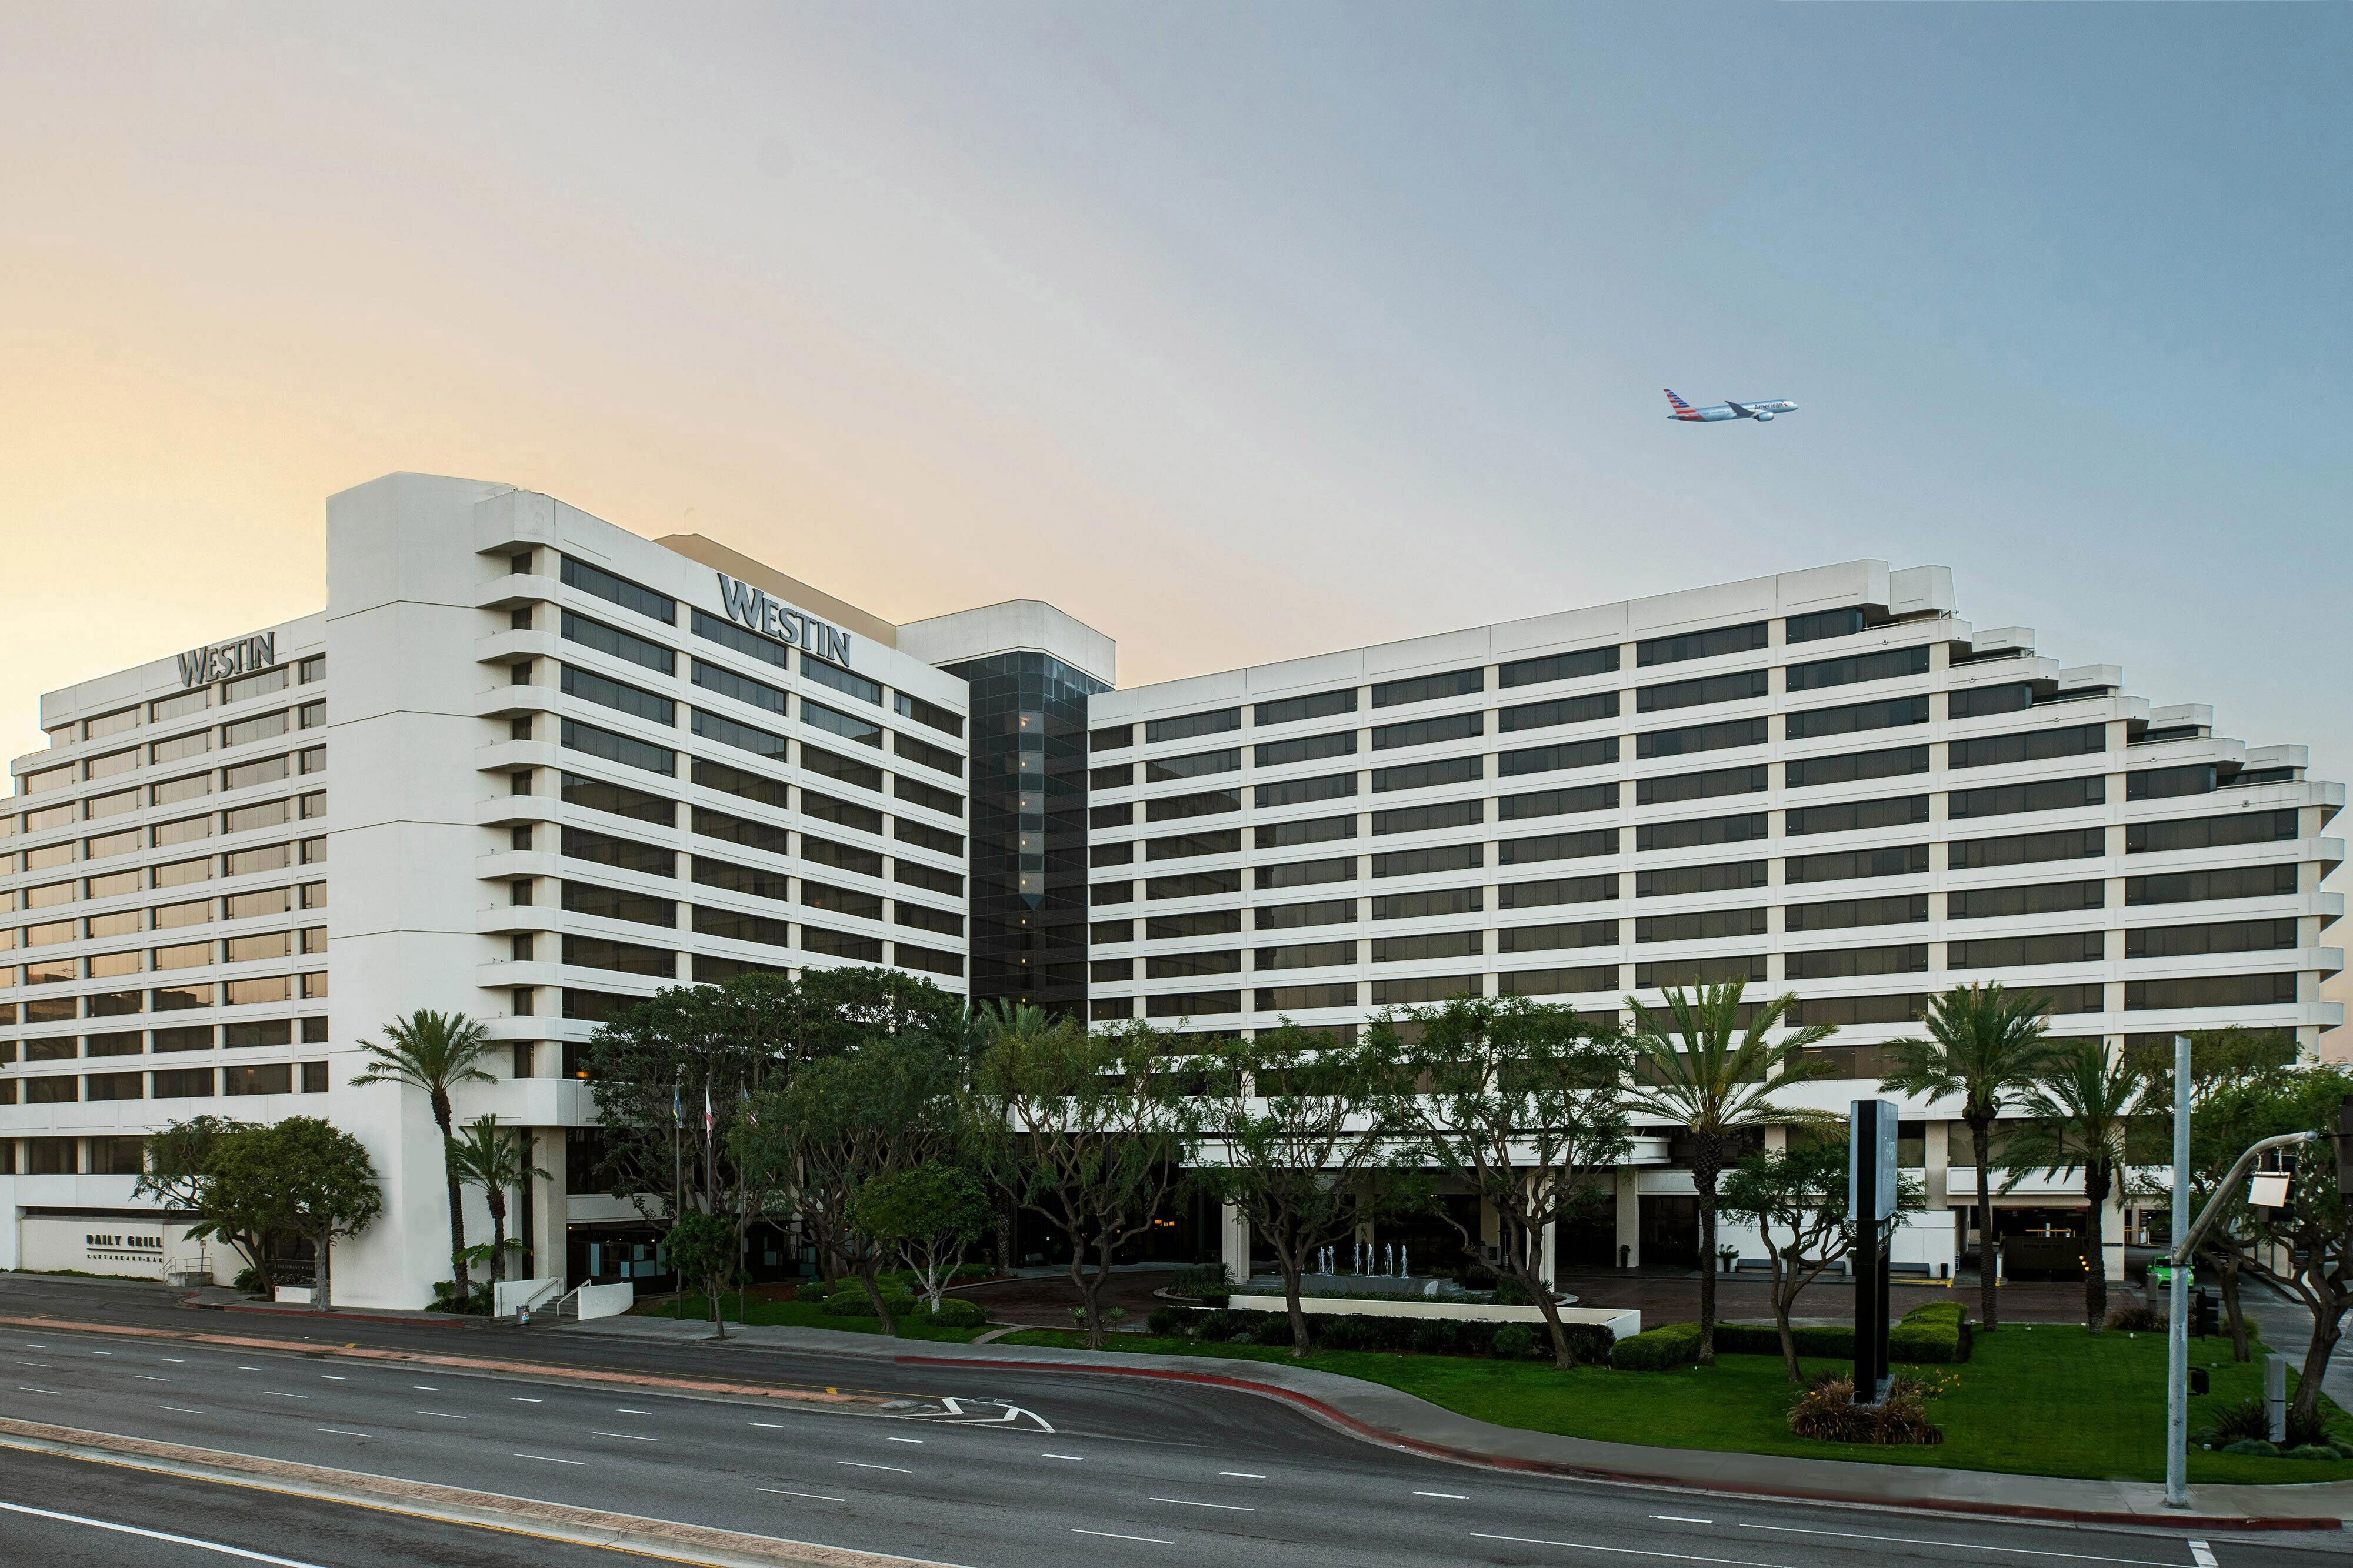 Photo of The Westin Los Angeles Airport, Los Angeles, CA